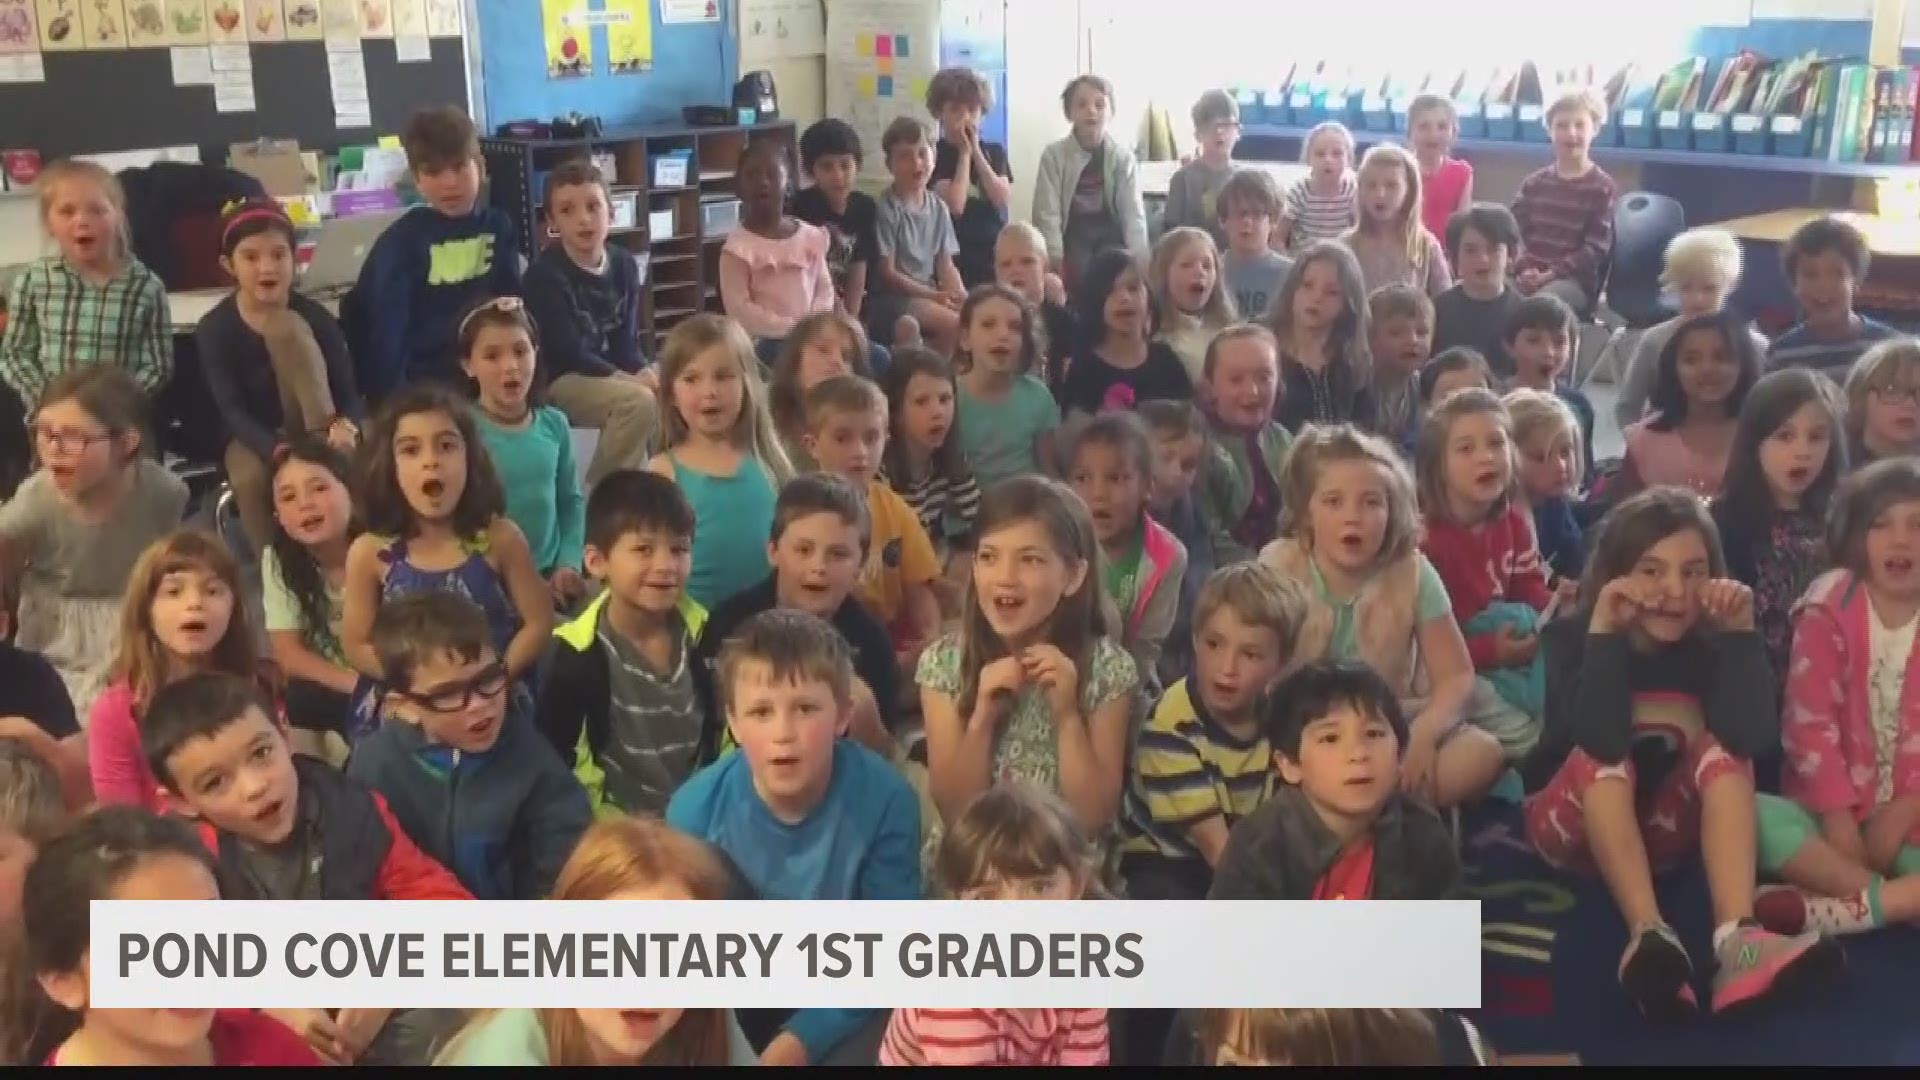 Todd Gutner's baritone was easy to pick out among a room full of sopranos in a video he made with the first grade class at Pond Cove Elementary School in Cape Elizabeth on May 8, 2018